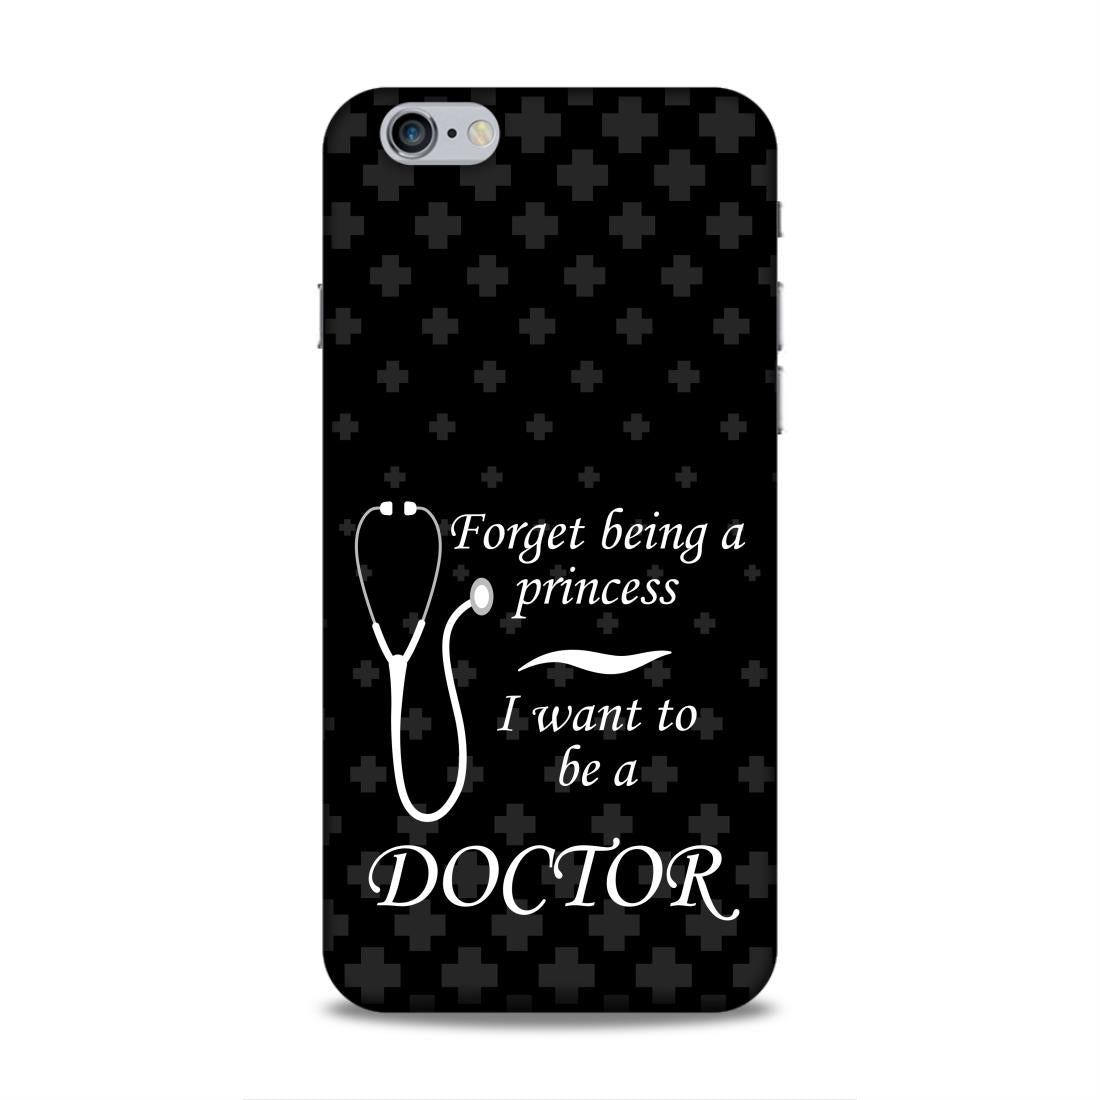 Forget Princess Be Doctor Hard Back Case For Apple iPhone 6 Plus / 6s Plus